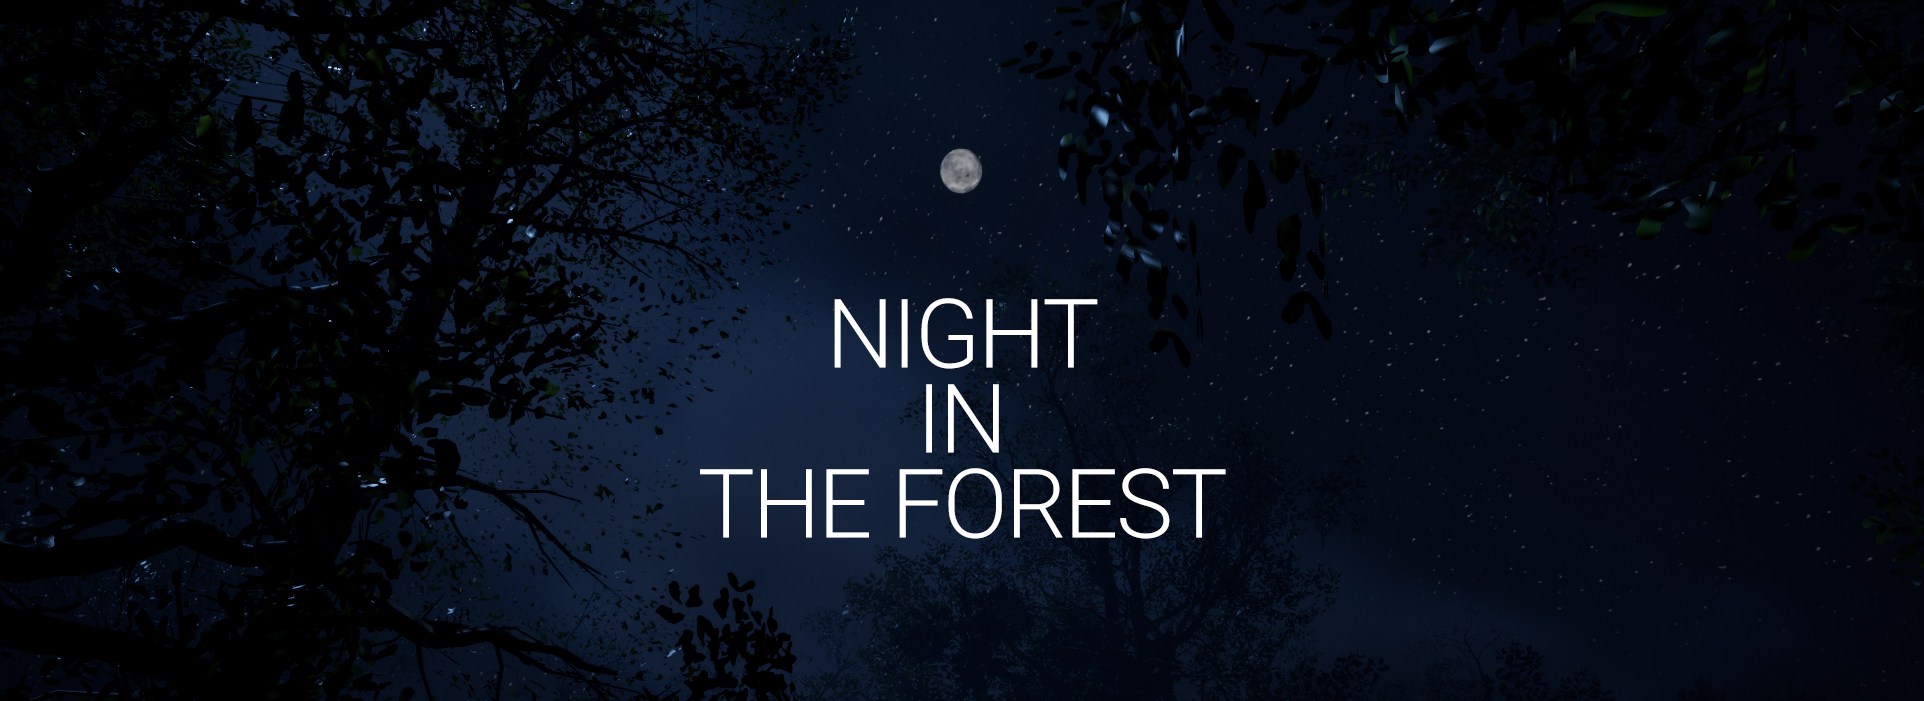 NIGHT IN THE FOREST